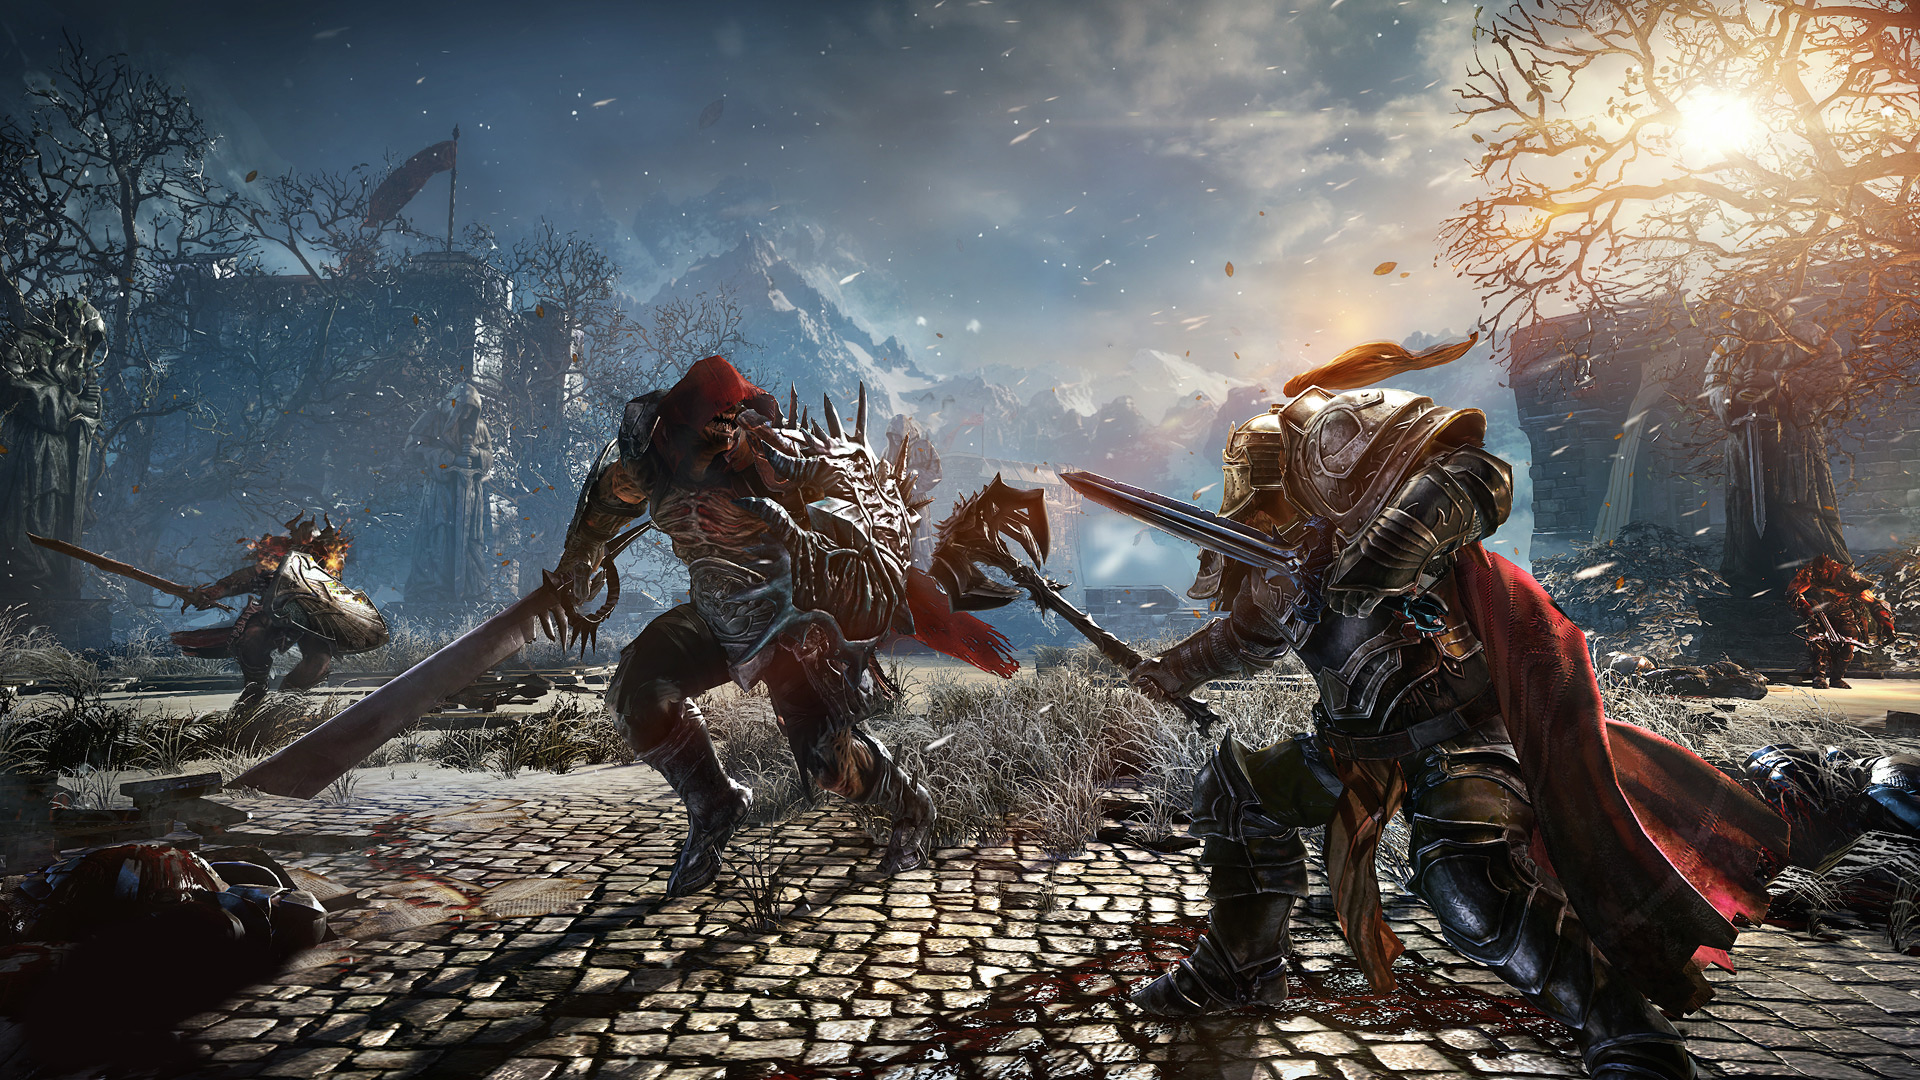 Lords of the Fallen PC Requirements: Can You Run The Game?